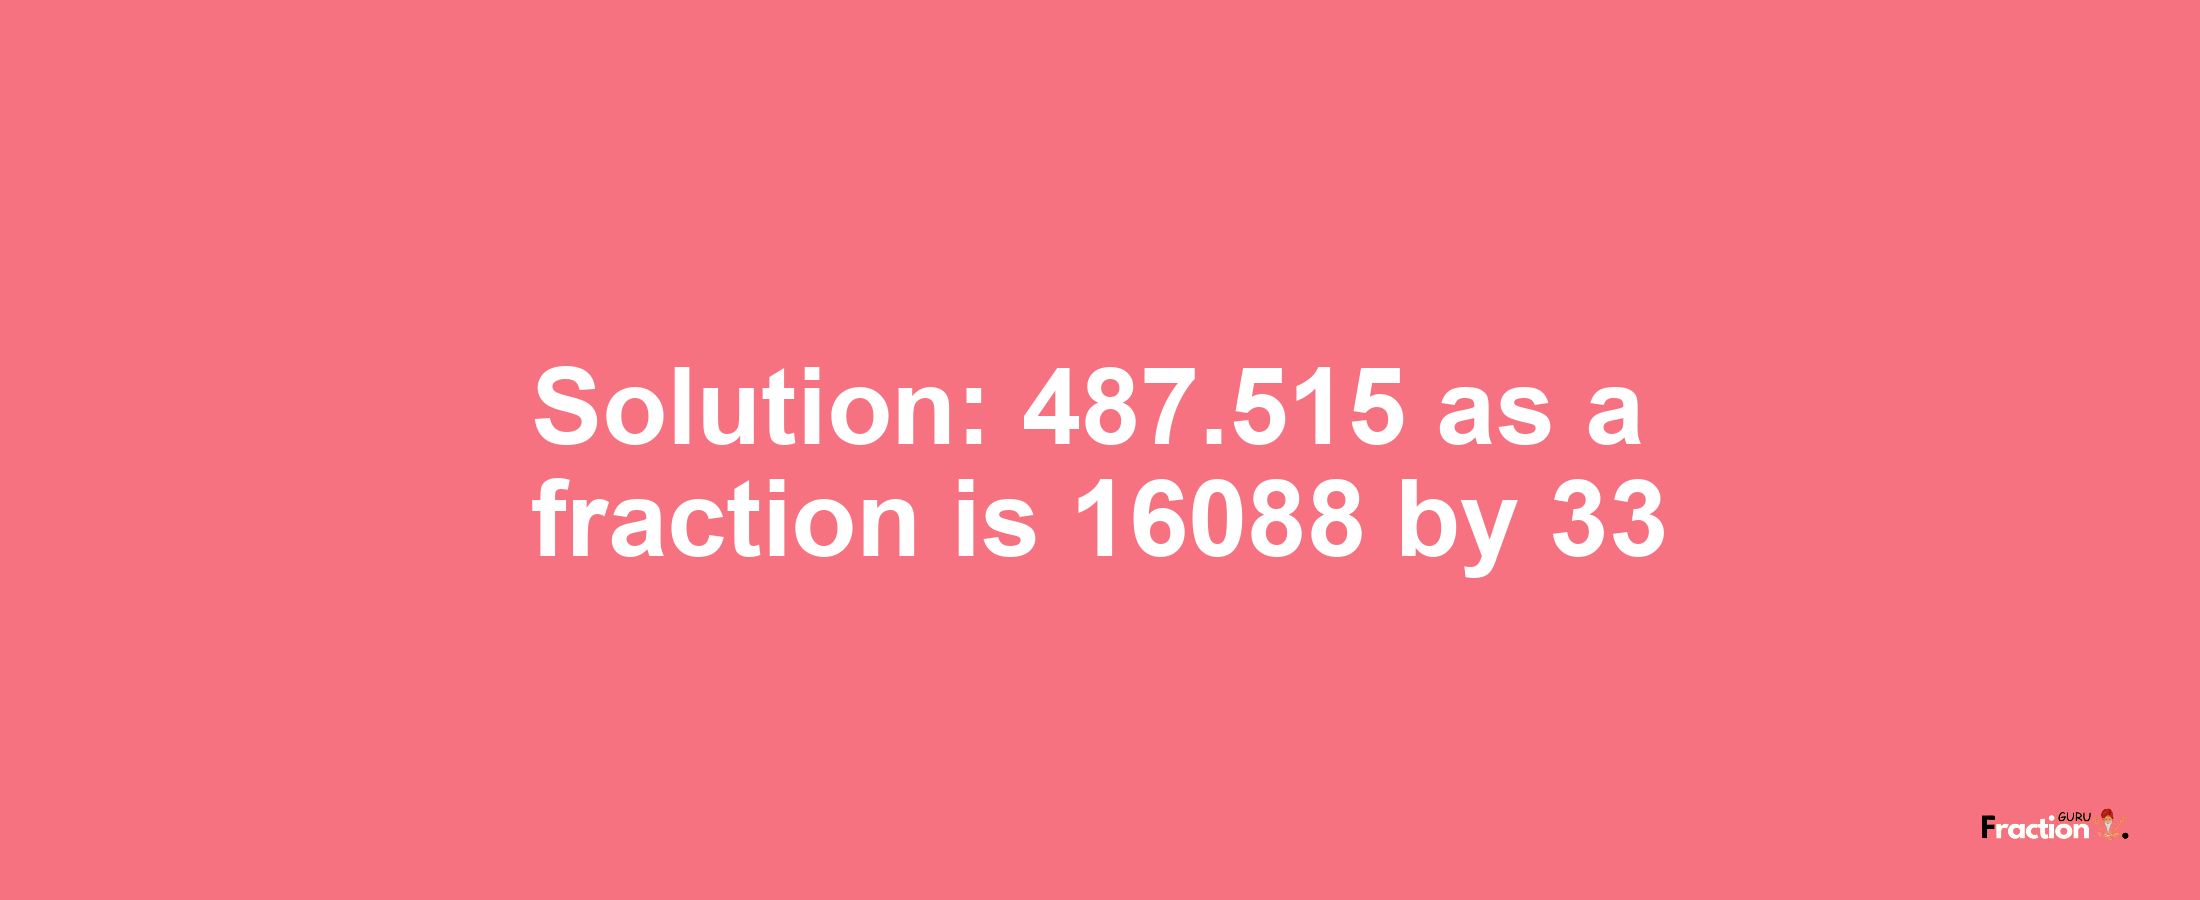 Solution:487.515 as a fraction is 16088/33